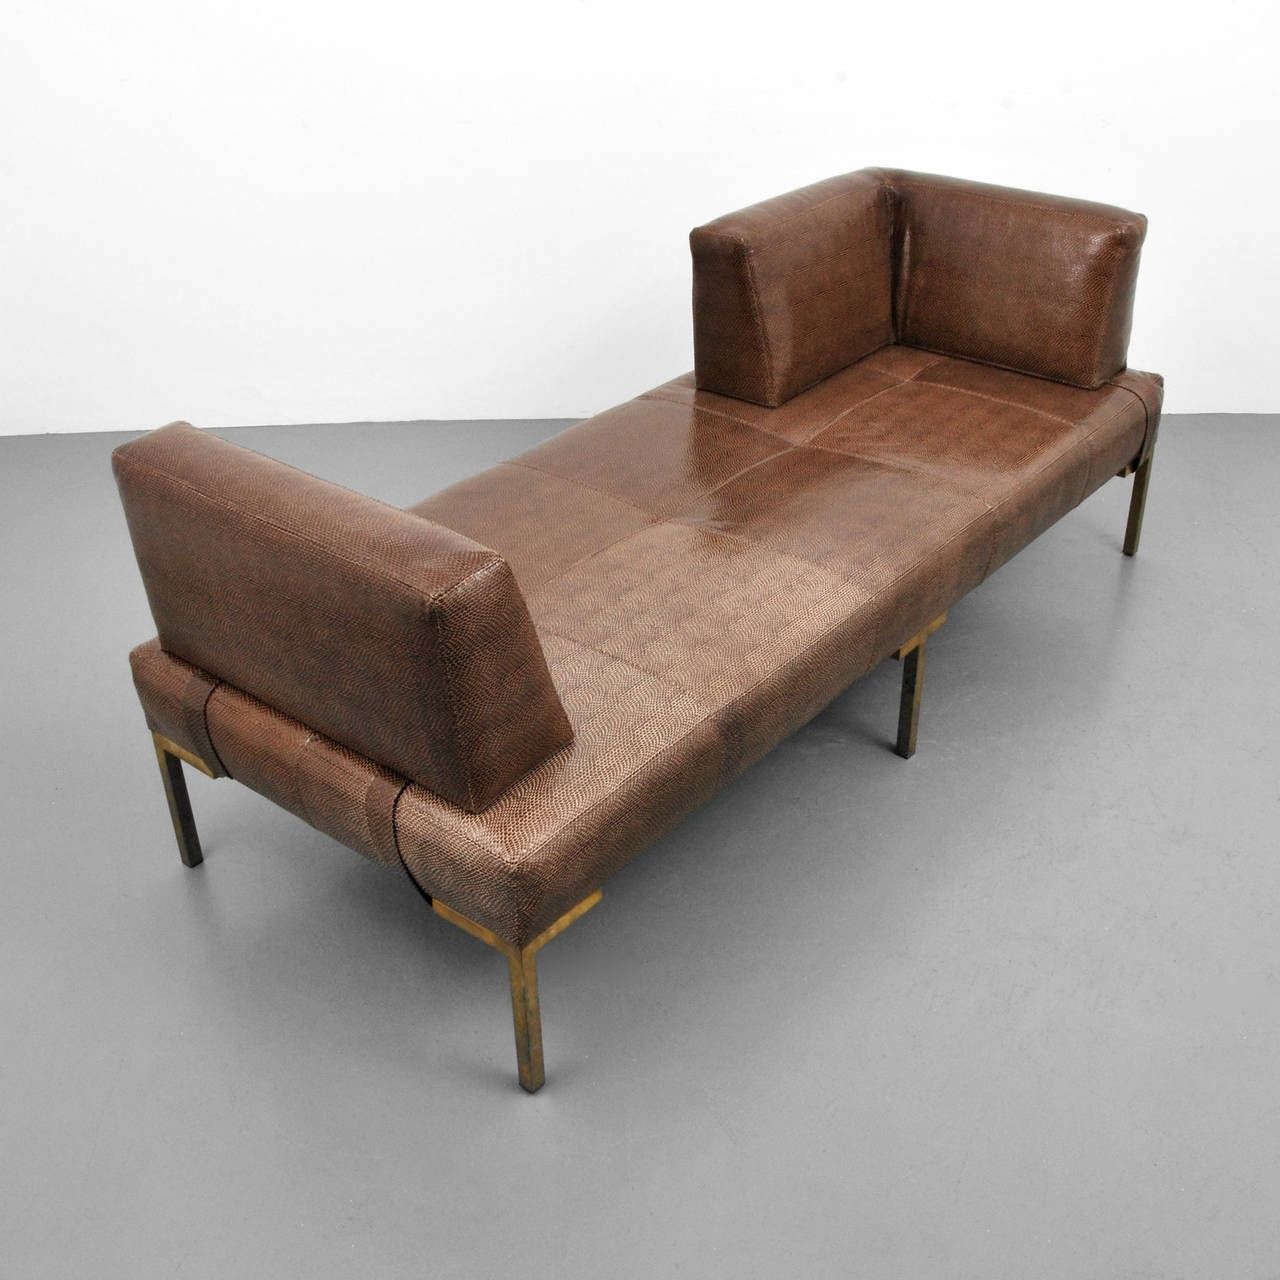 Favorite Daybed Chaises Intended For Luigi Gentile Leather Daybeds Or Chaise Lounges, Two Available (View 1 of 15)